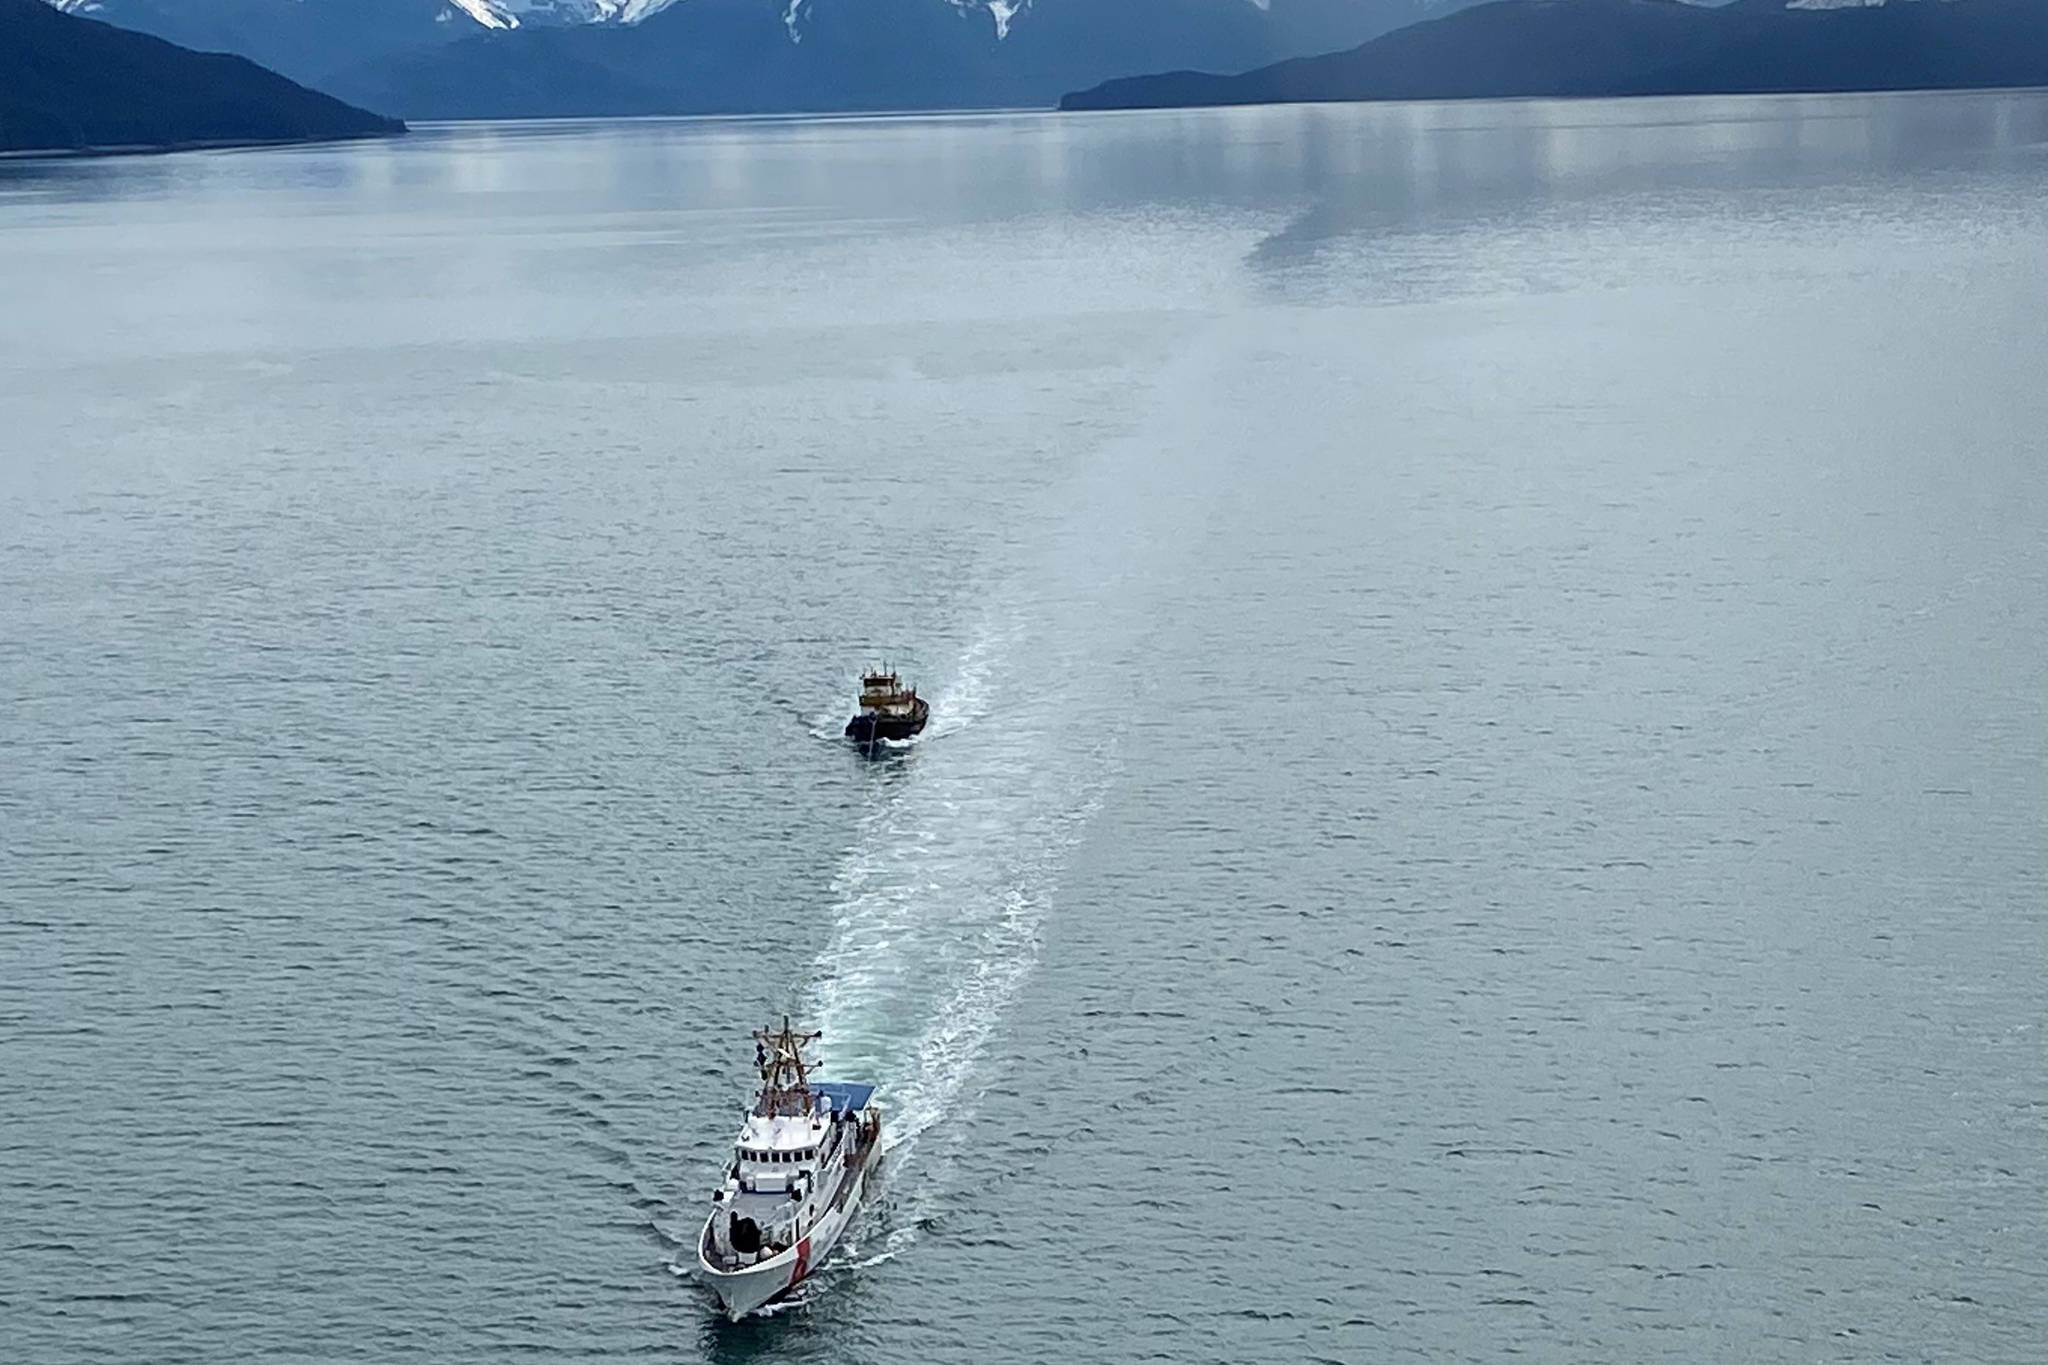 Coast Guard Cutter John McCormick, a 154-foot Sentinel–class vessel, towed the derelict tugboat Lumberman, to a position 54 miles west of Cross Sound, Alaska, on May 2, 2021. The decision to dispose of the Lumberman at sea, which had been abandoned in the Gastineau channel in 2016, was made after it was determined to be derelict and posed a significant public safety risk. (Courtesy photo / U.S. Coast Guard)